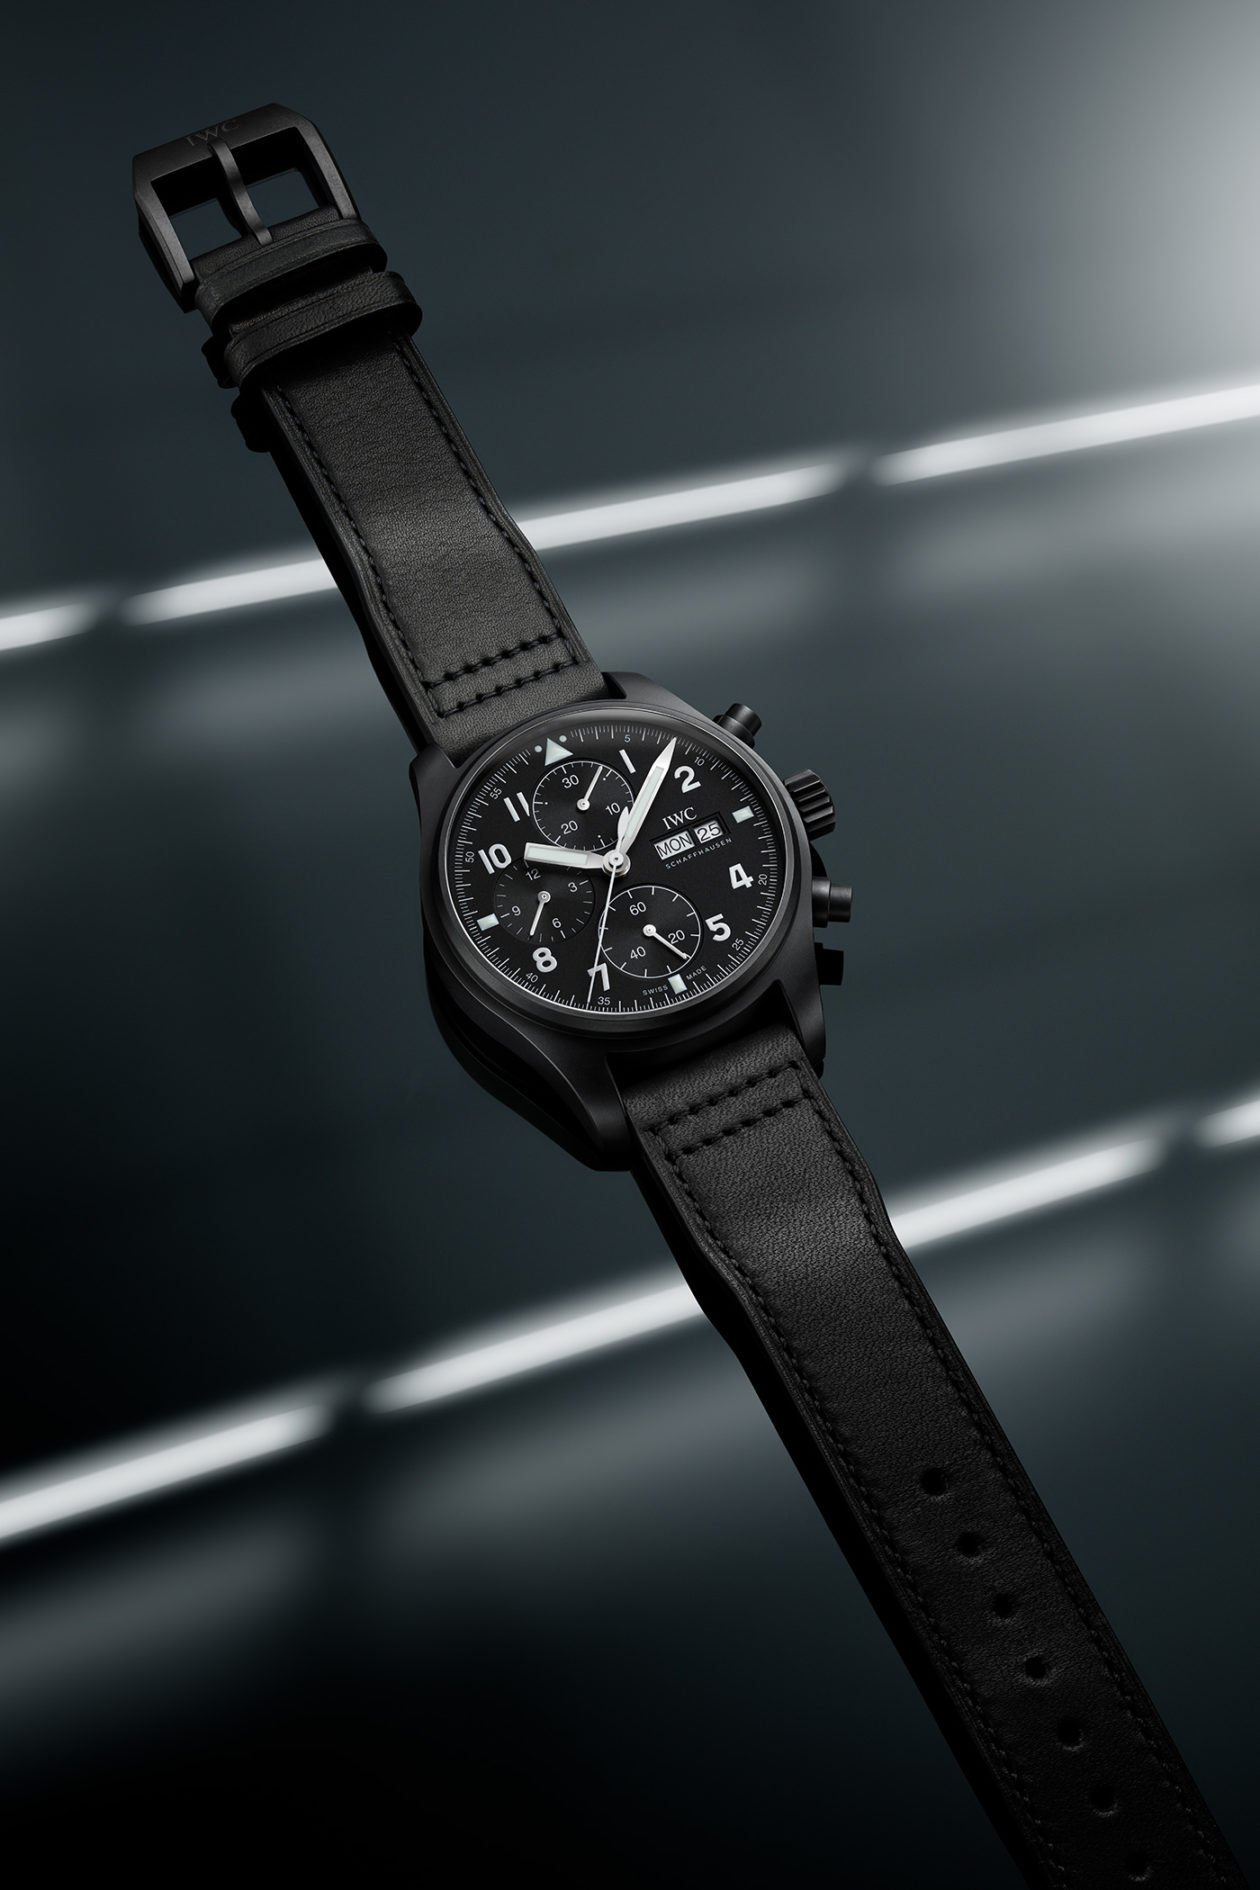 IWC Pilot’s Watch Chronograph Edition “Tribute to 3705”